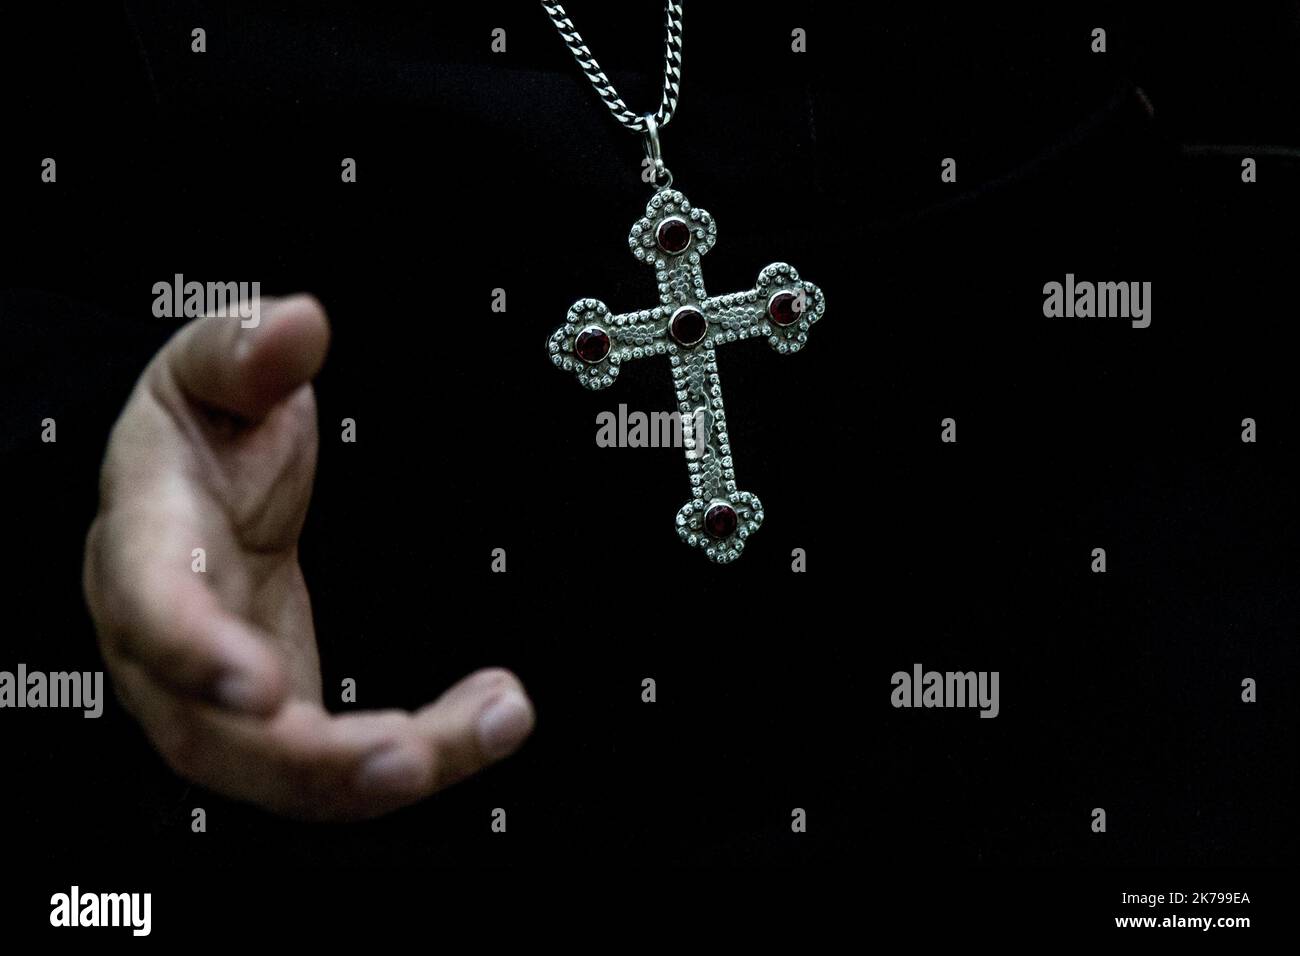 Â©Chris Huby / Le Pictorium/MAXPPP - Chris Huby / Le Pictorium - 11/07/2017  -  Syrie / Syrie du nord / Hassake  -  Une croix orthodoxe  / 11/07/2017  -  Syria / northern syria / Hassake  -  An orthodox cross Stock Photo